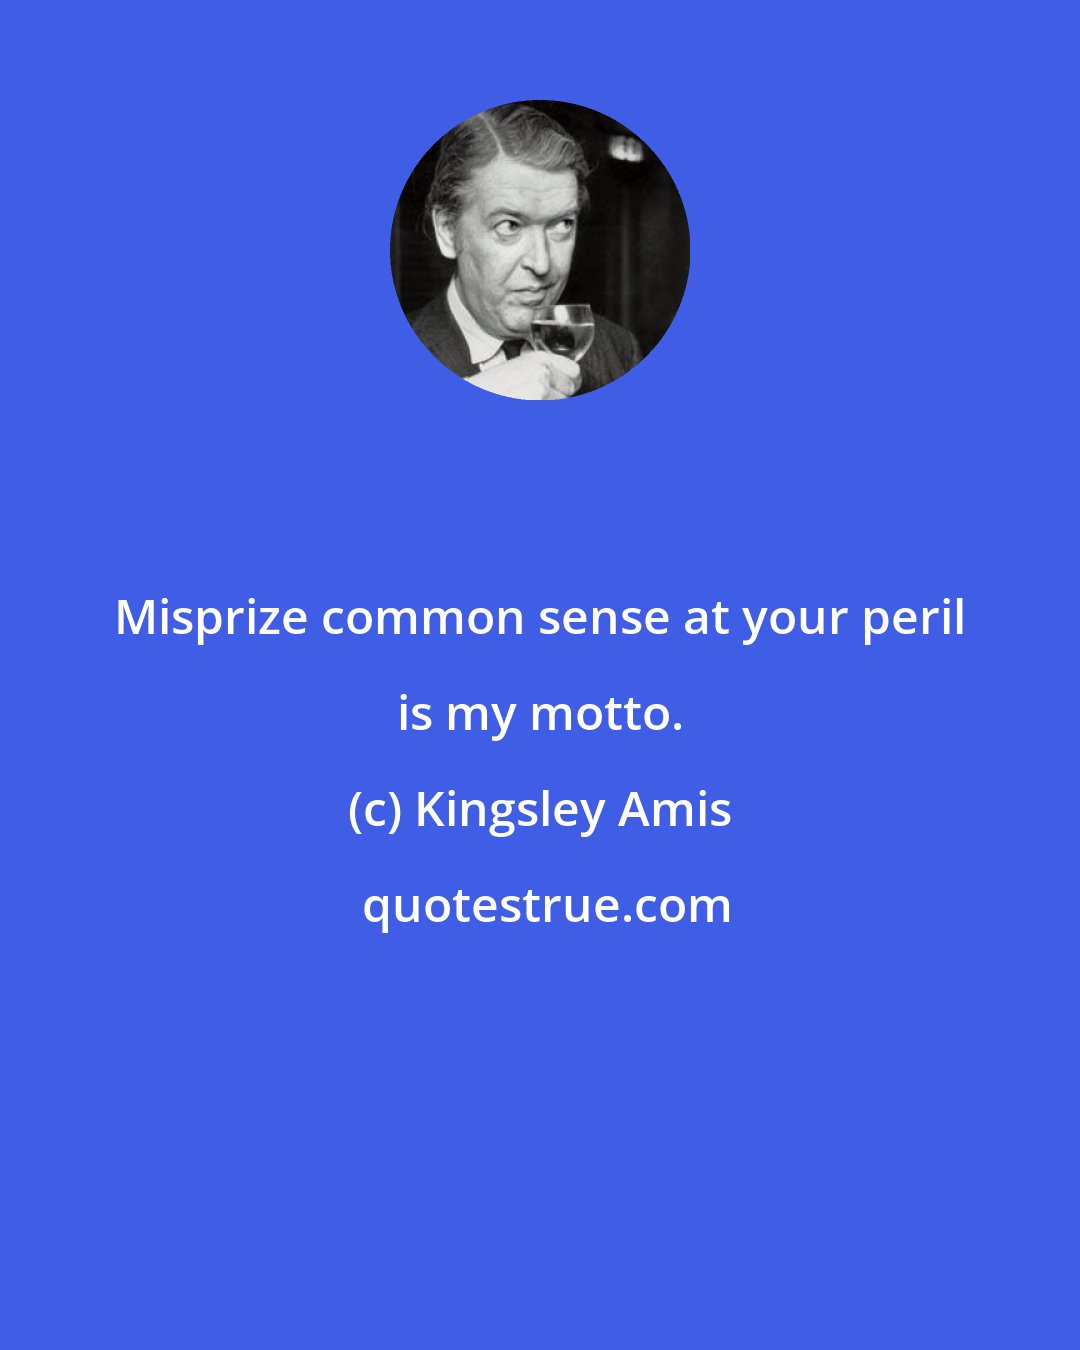 Kingsley Amis: Misprize common sense at your peril is my motto.